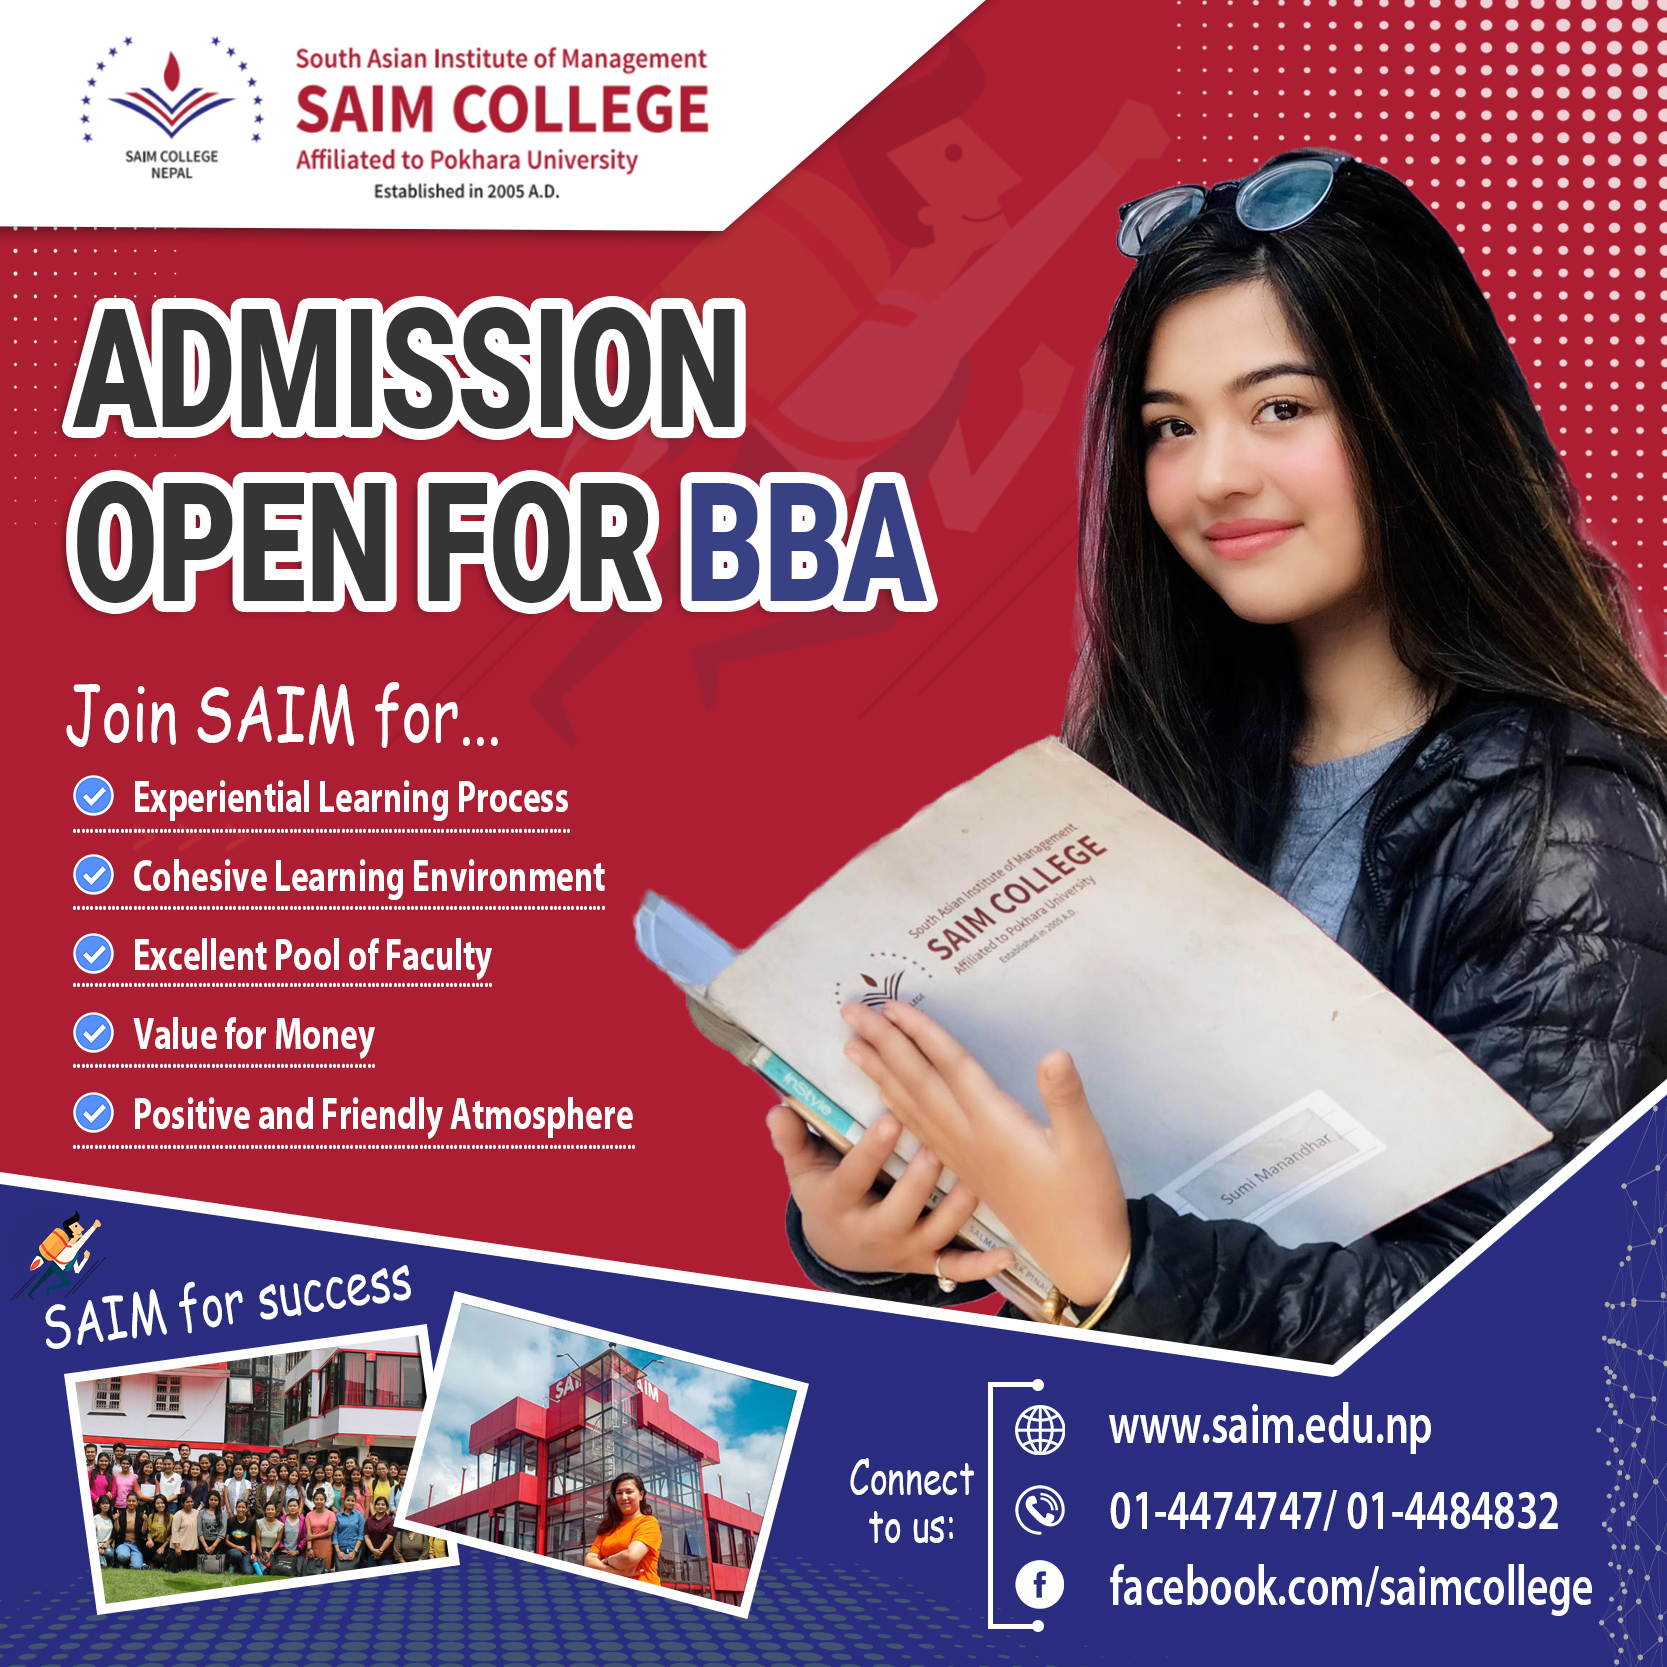 South Asian Institute of Management (SAIM College) #BestManagementCollege #BBA #Spring2021